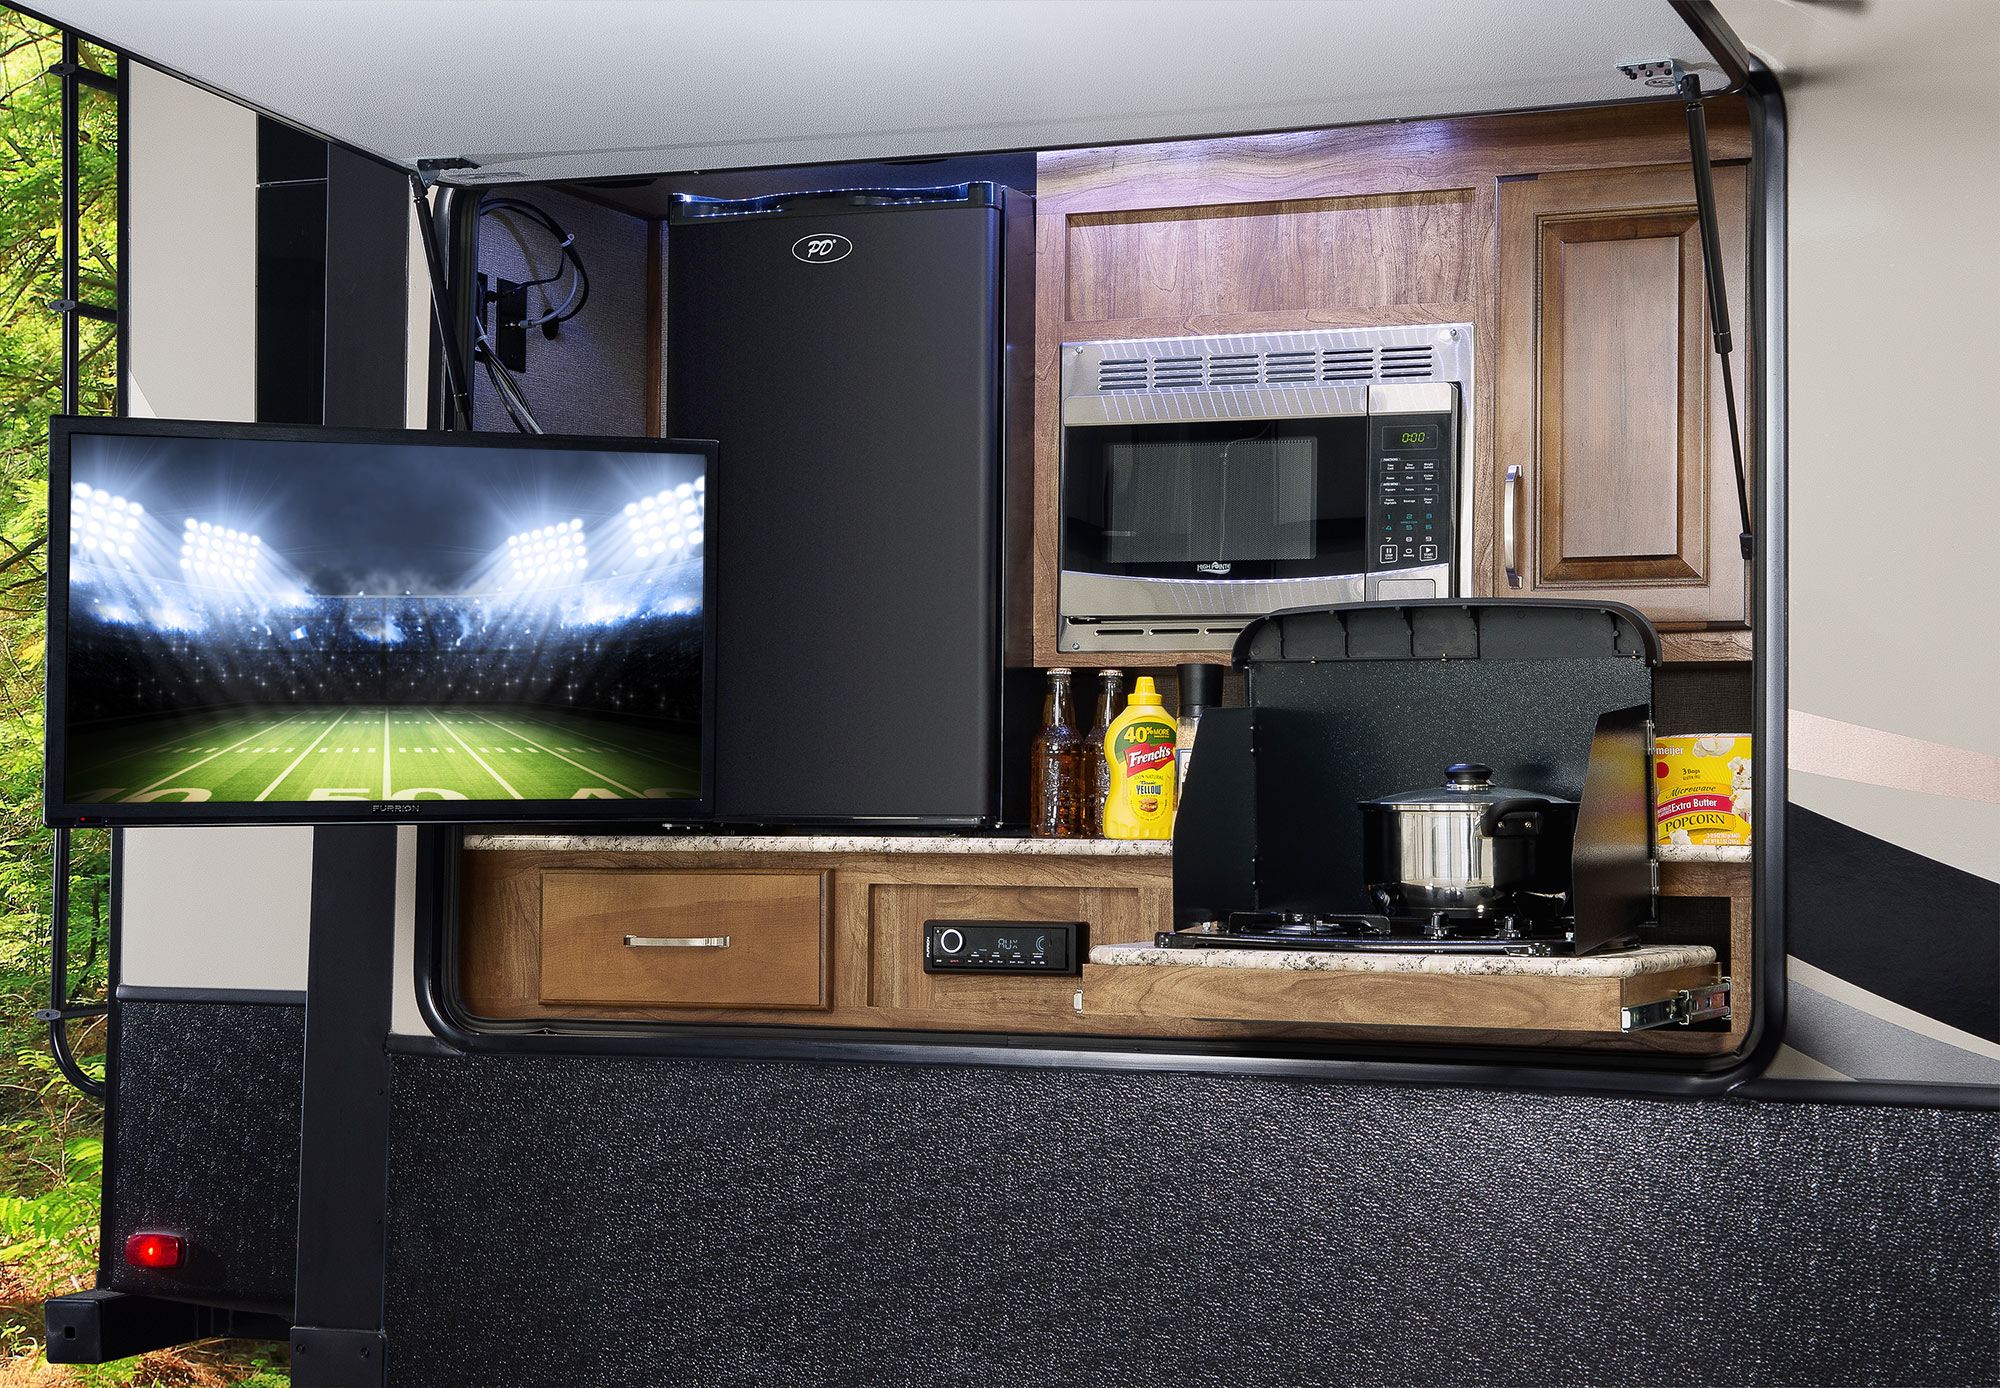 9 Best Travel Trailers With Outdoor Kitchens Survival Tech Shop